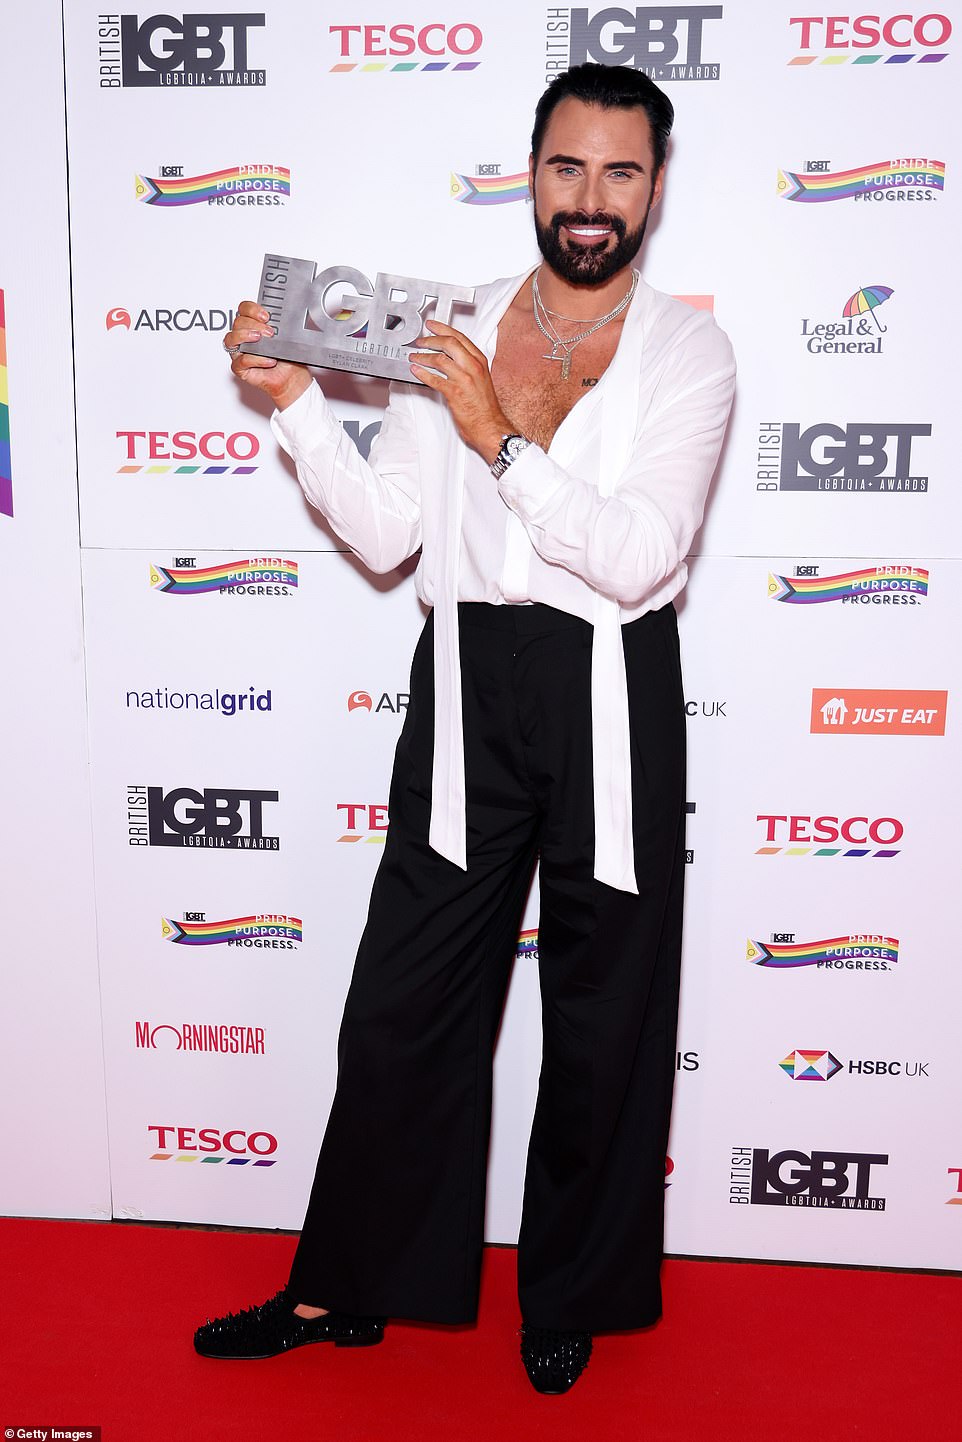 Rylan Clark won the Celebrity of the Year Award at the event